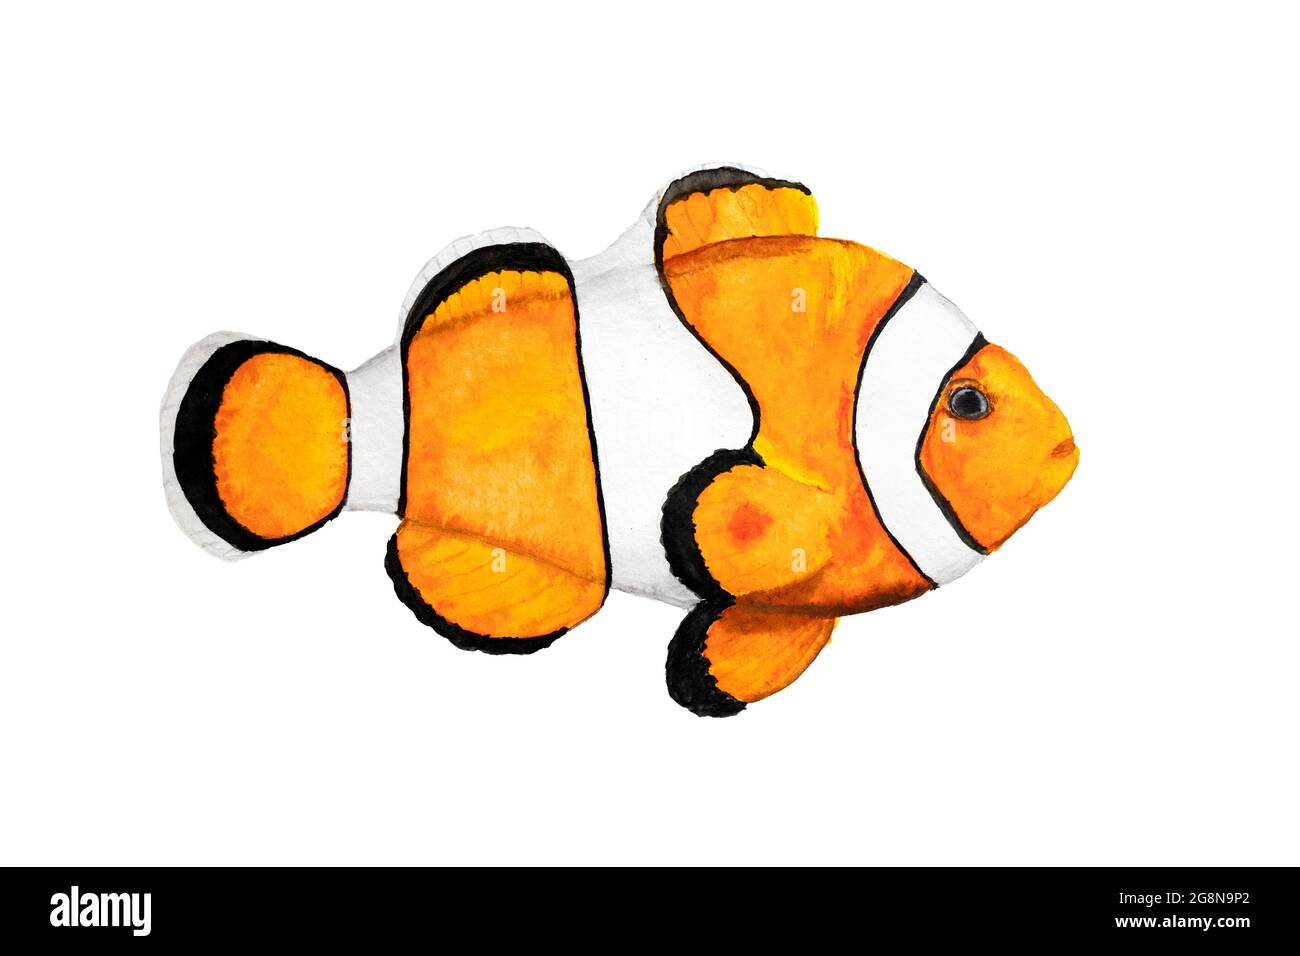 Clown fish watercolor drawing on white background. tropical amphiprion Aquarium fish. Book illustration or postcard. Nemo fish image for print or stic Stock Photo